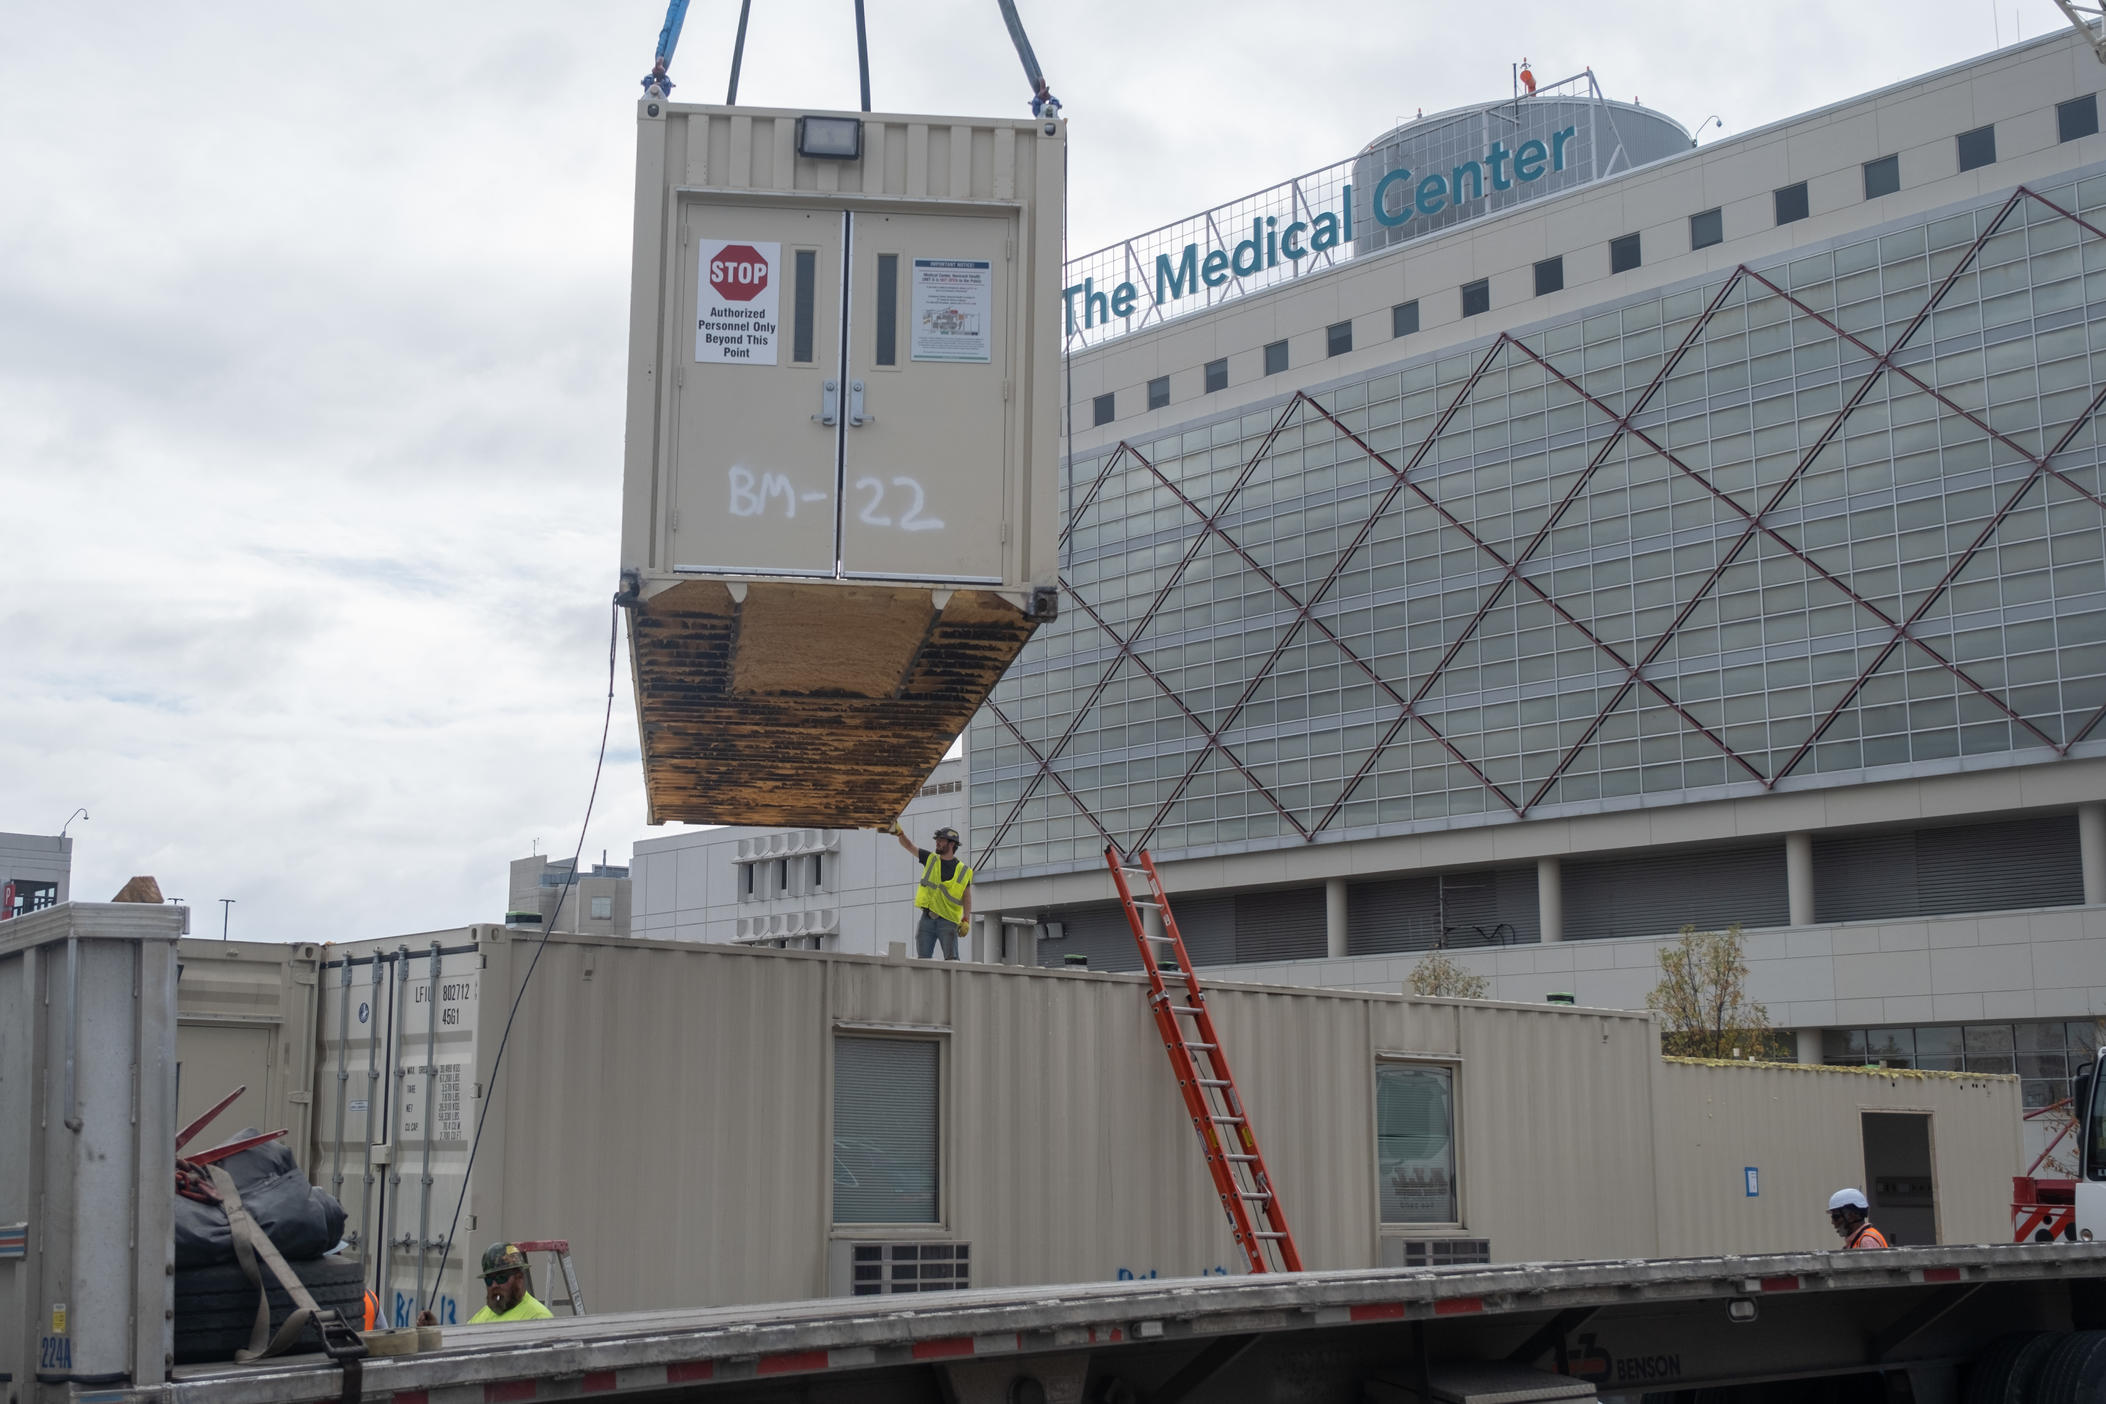 A shipping container, part of The Medical Center's temporary medical unit, gets prepared for transport to Atlanta.